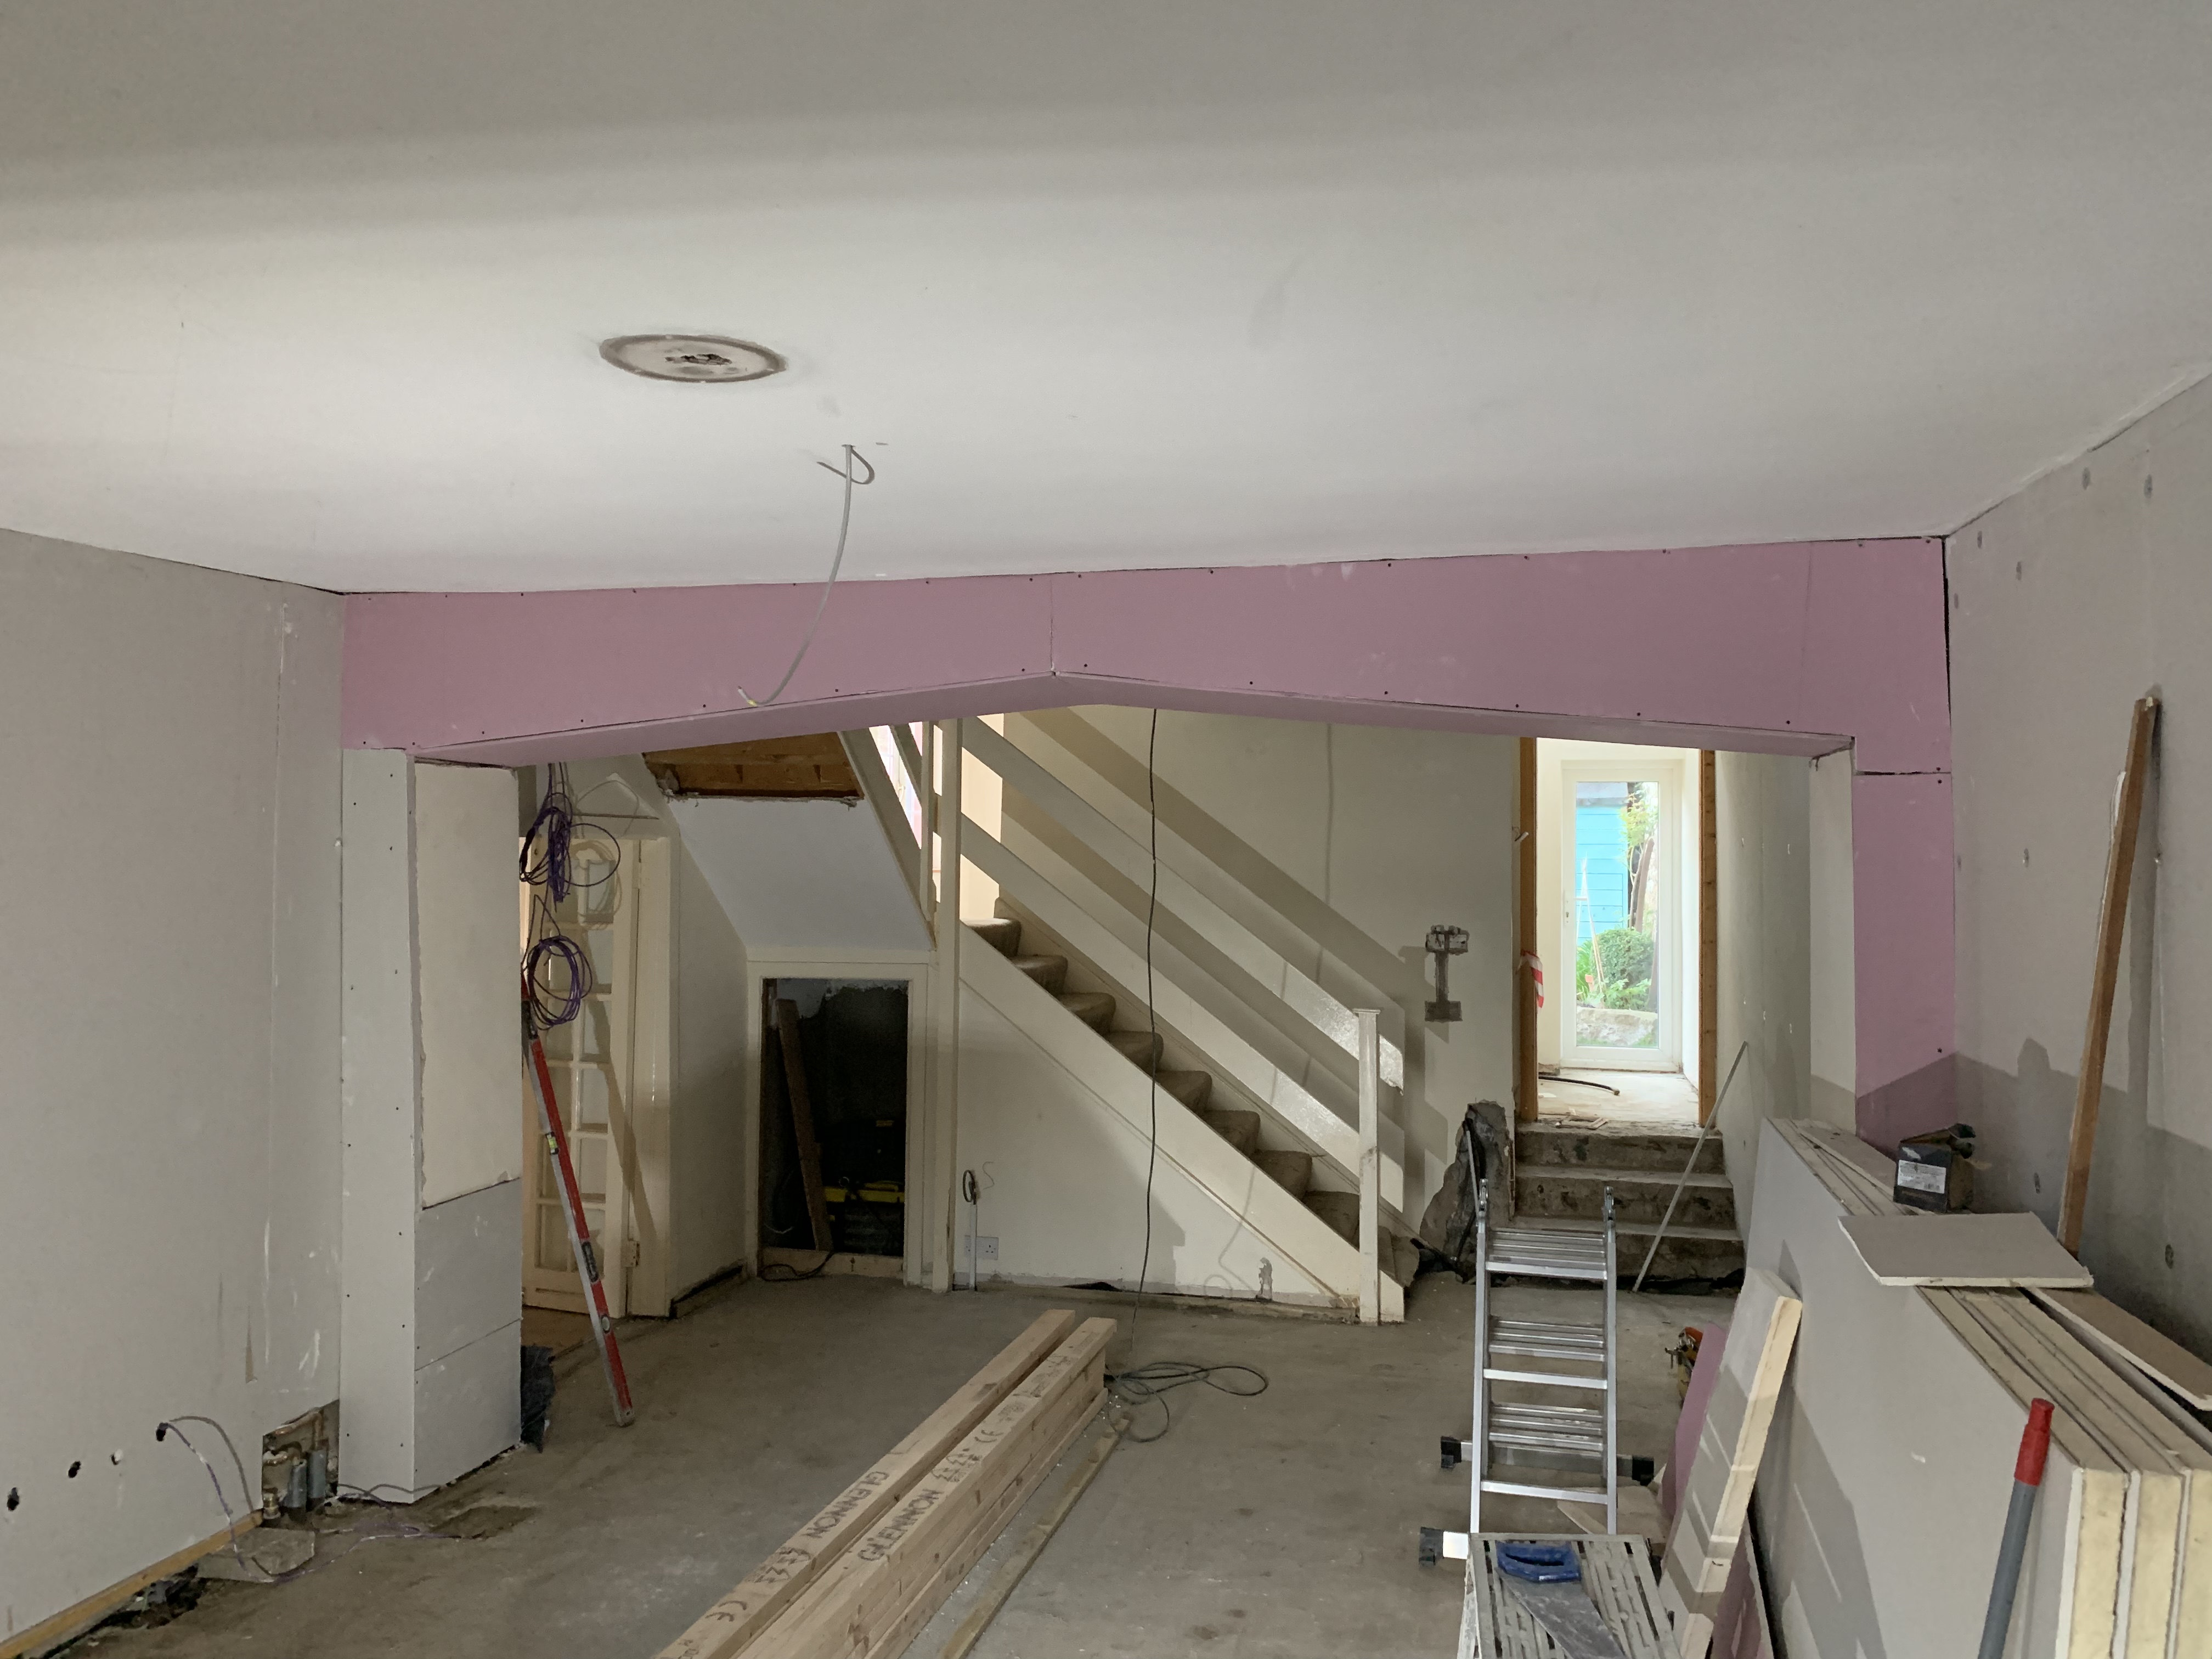 Plasterboard goes up, pipes come down